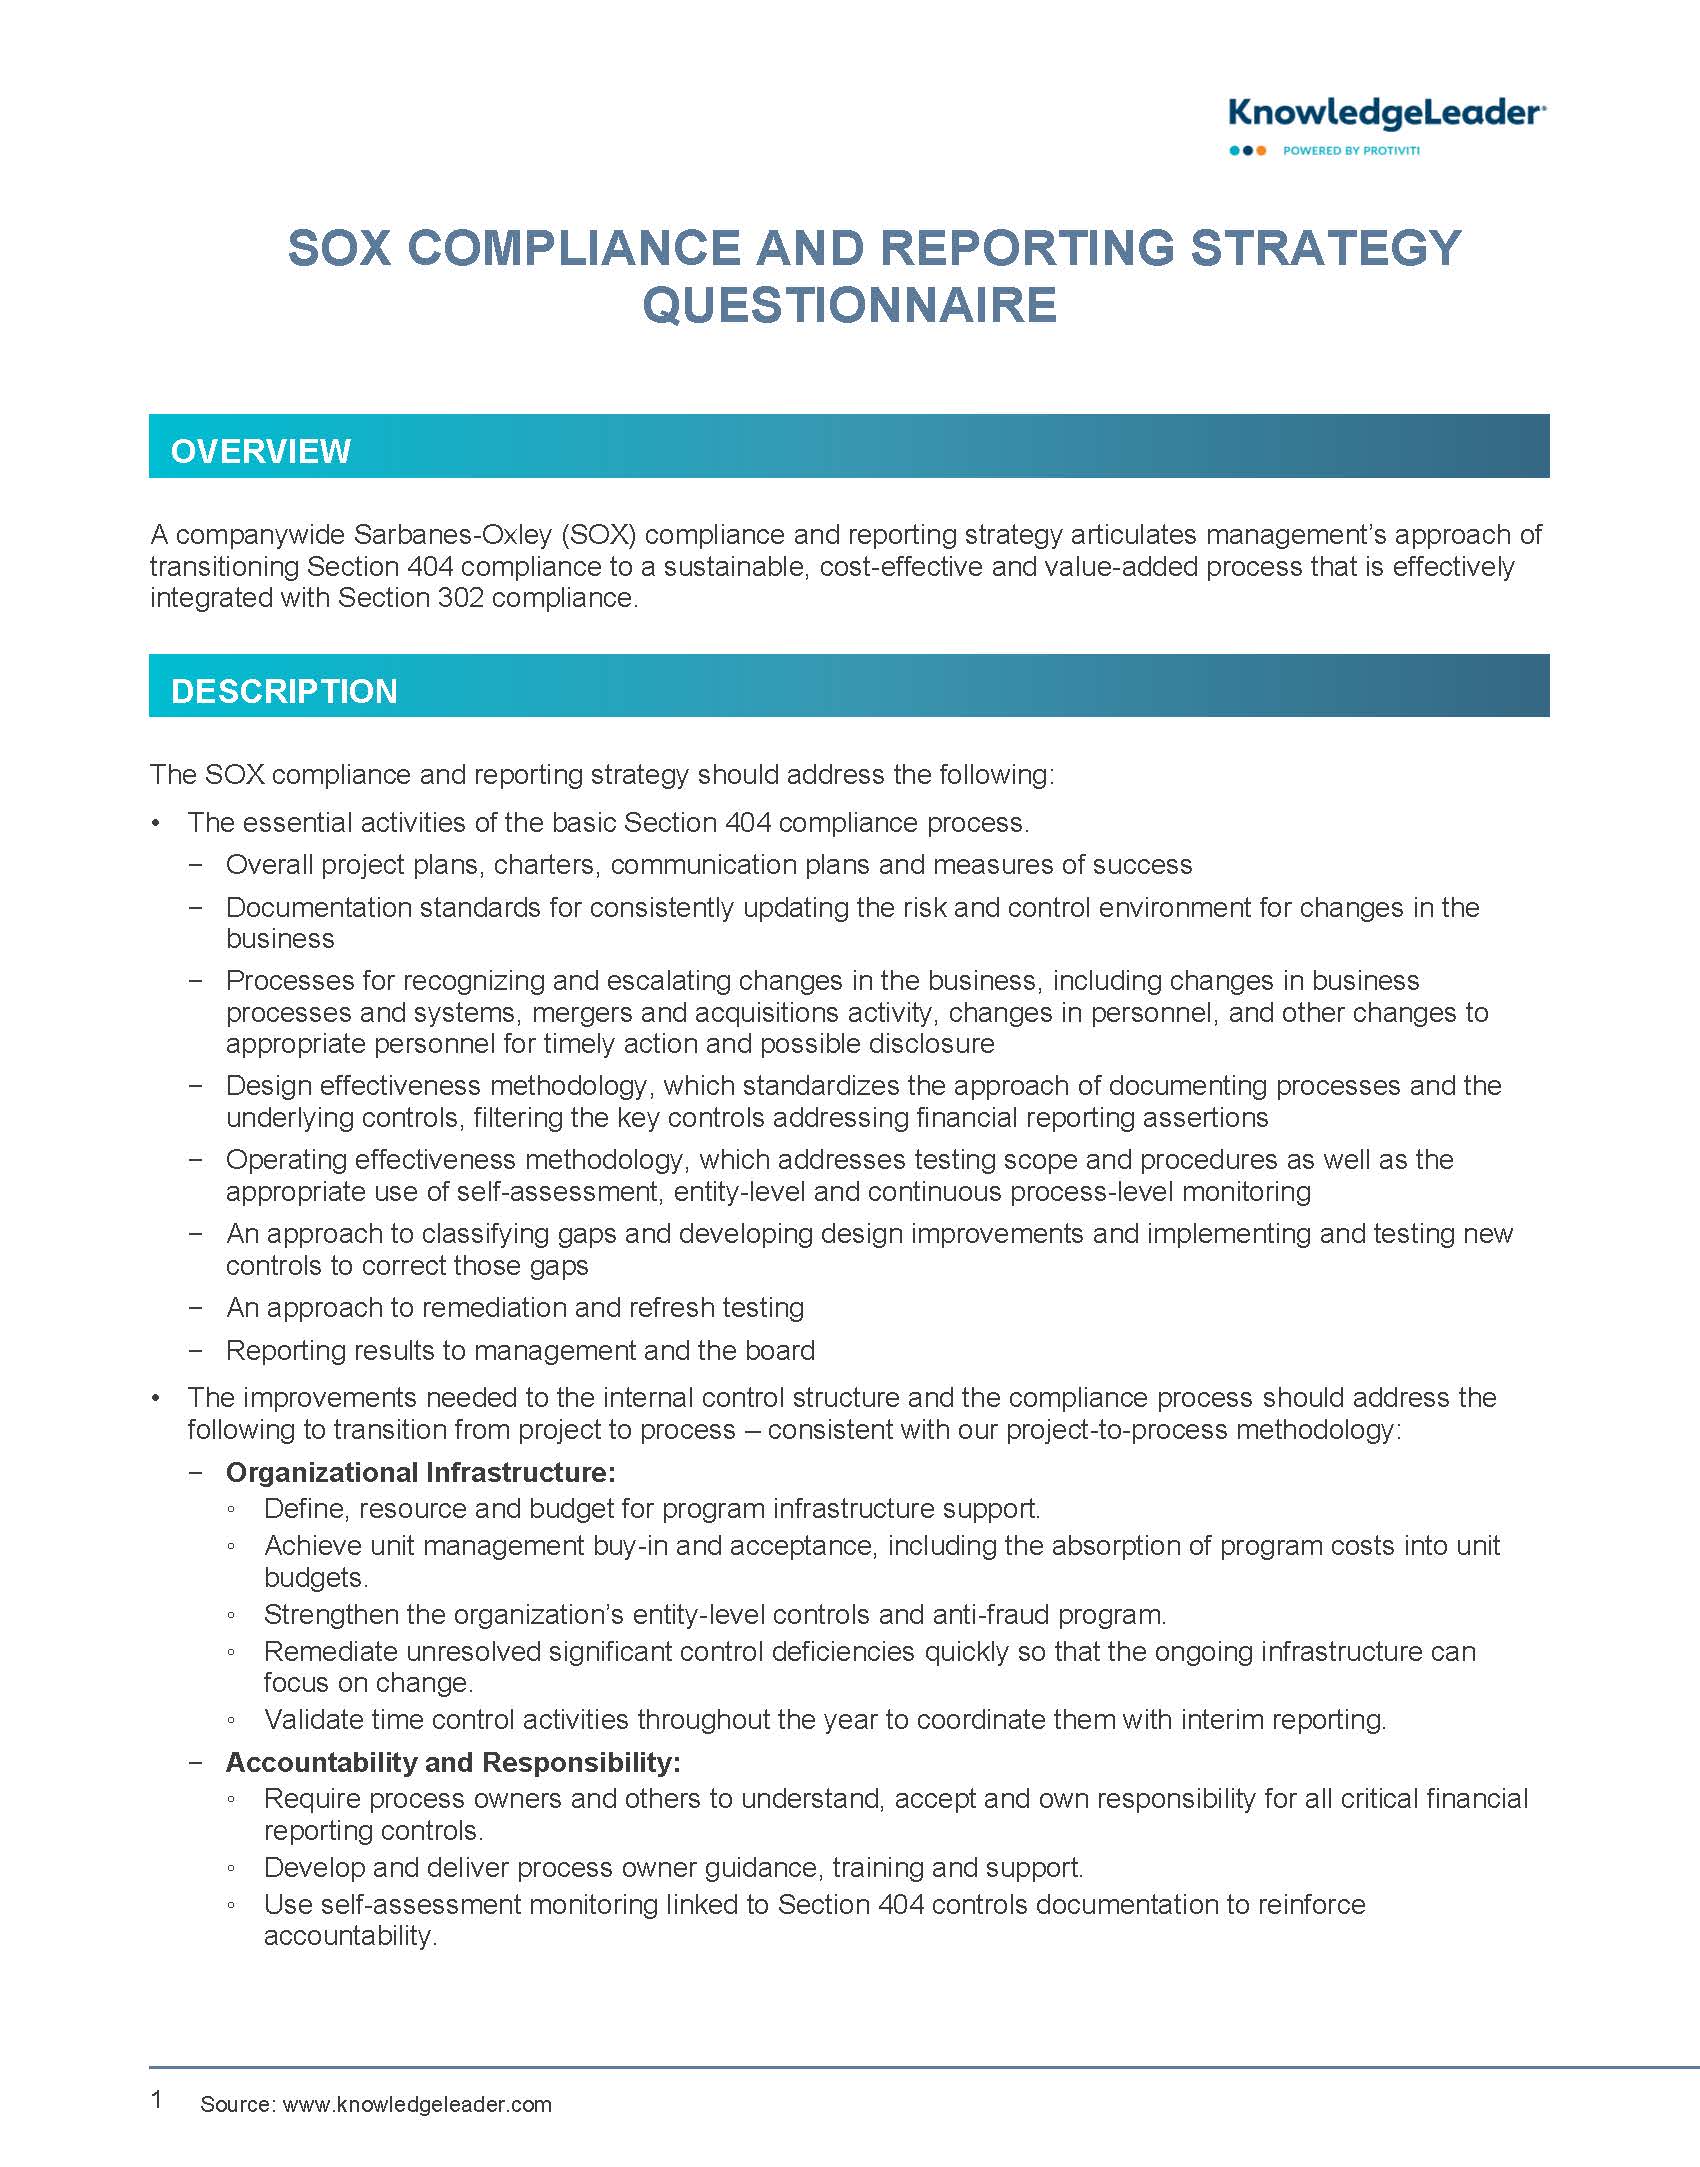 Screenshot of first page of SOX Compliance and Reporting Strategy Questionnaire